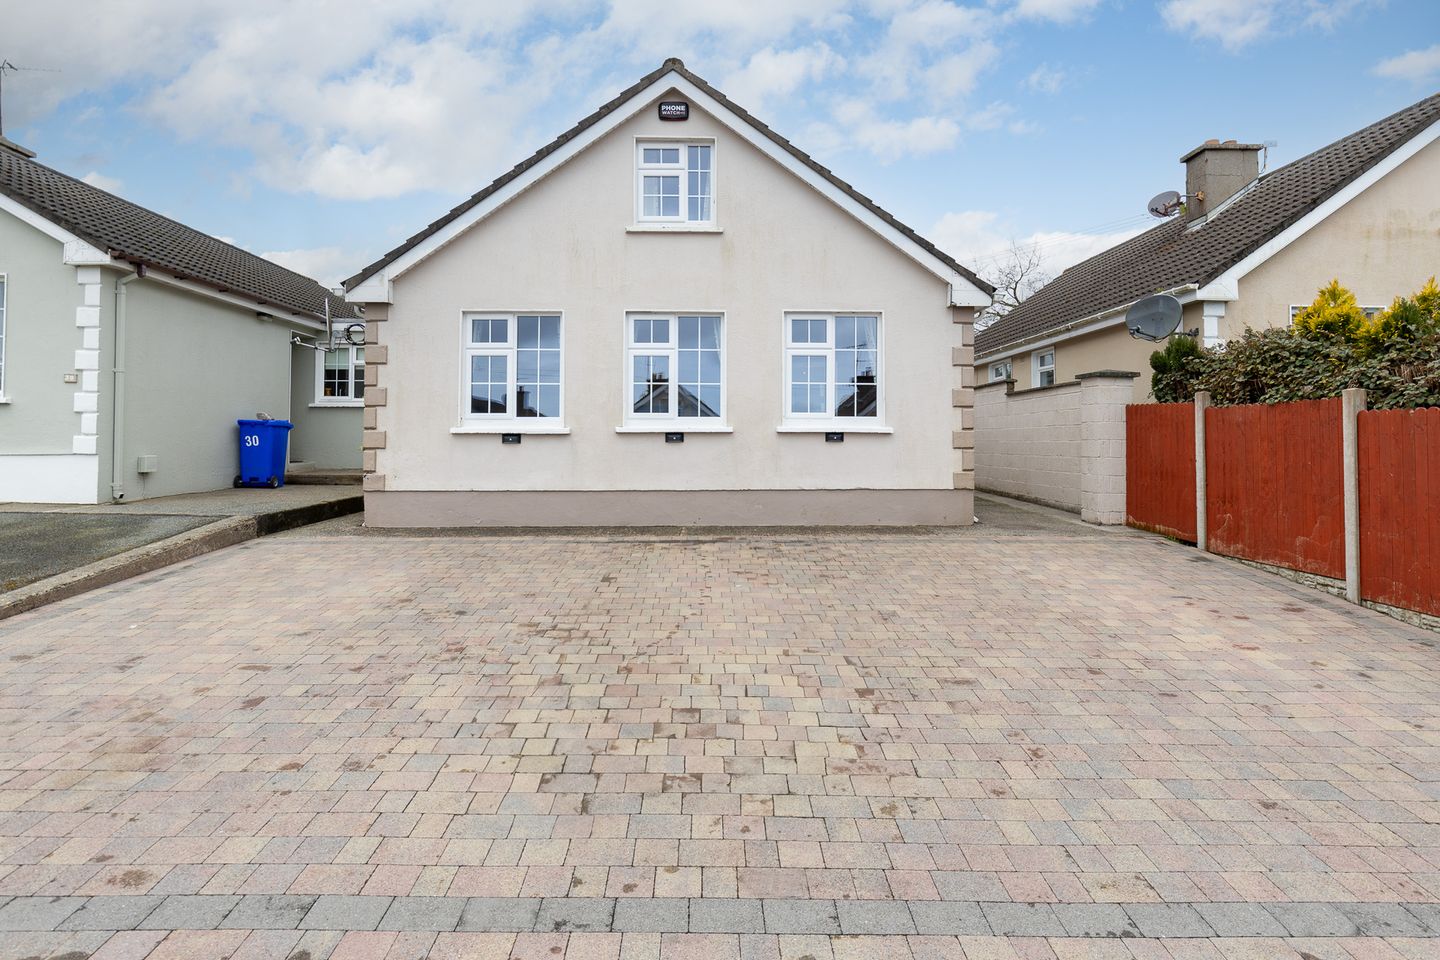 31 Carricklawn, Coolcotts, Wexford Town, Co. Wexford, Y35D8W9